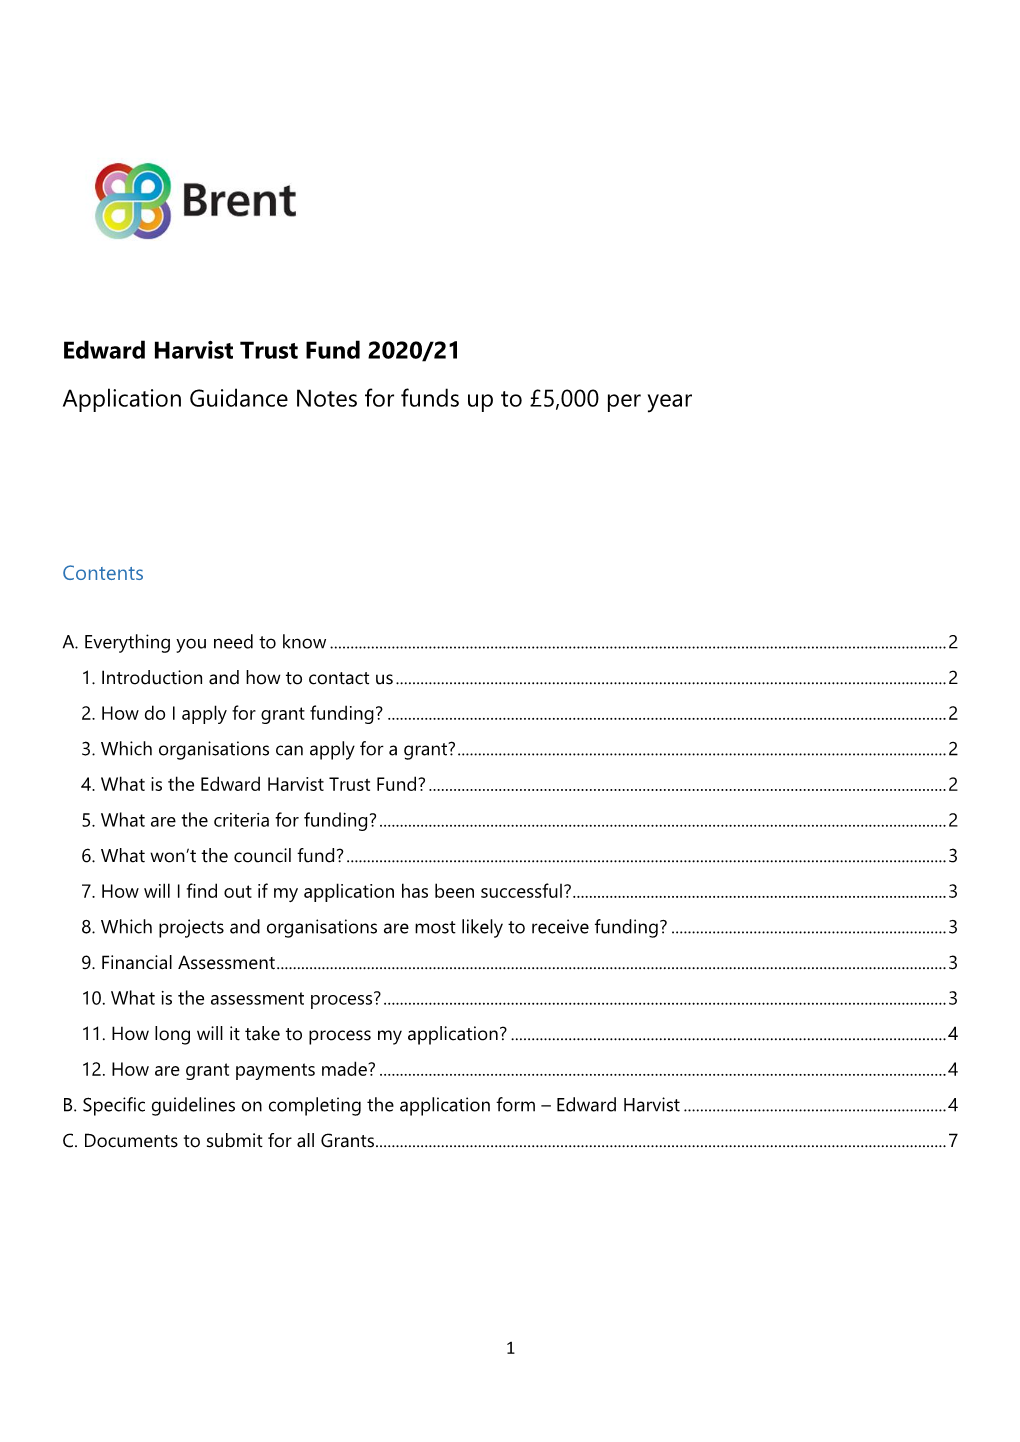 Edward Harvist Trust Fund 2020/21 Application Guidance Notes For